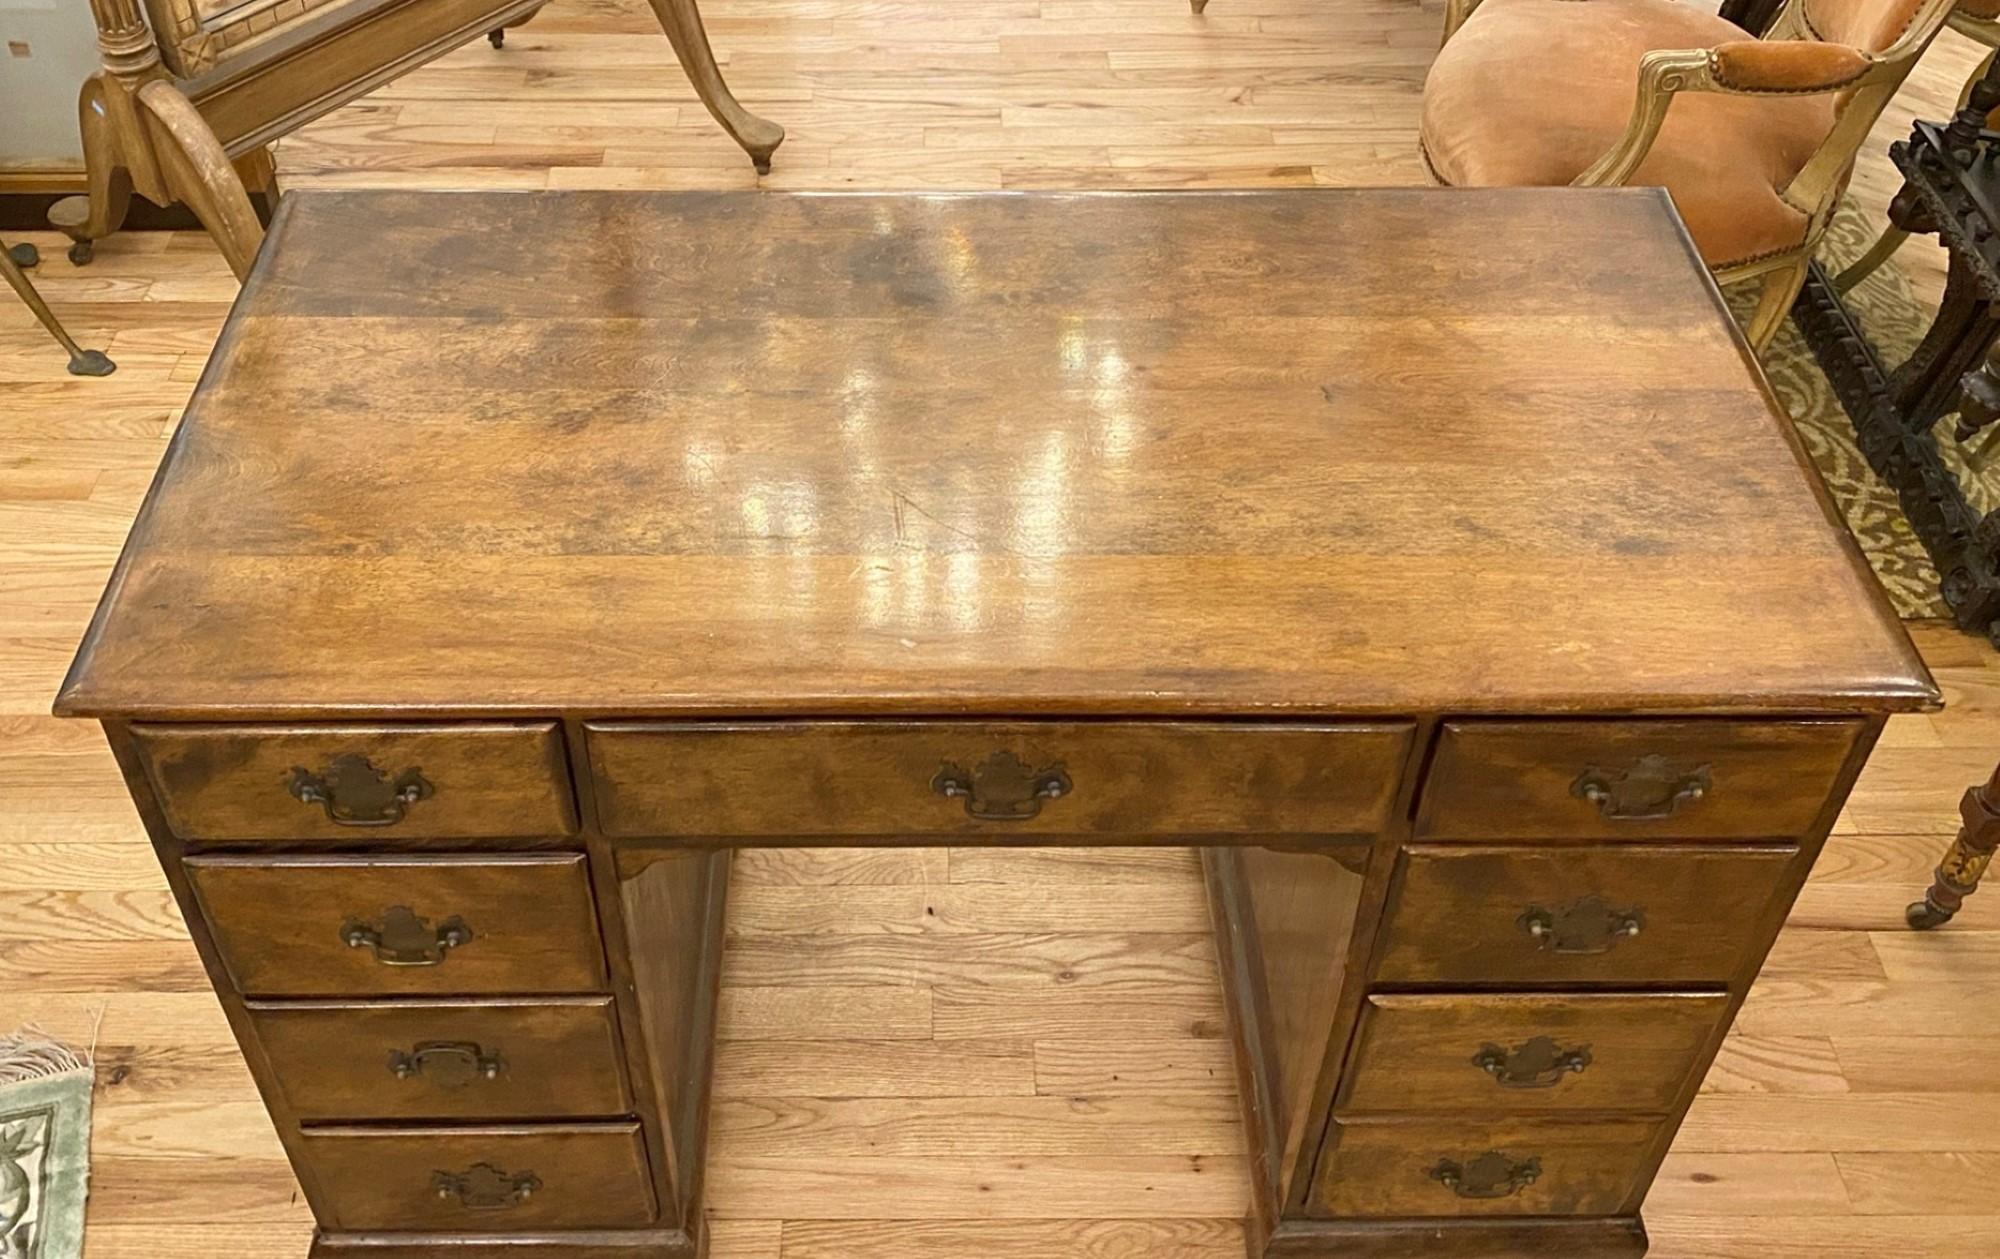 This antique 1940s desk features a center drawer and eight side drawers. Comes with Chippendale style hardware and dovetail joints. Kneehole desks date back to the 18th century and have sets of drawers on either side of the recessed or 